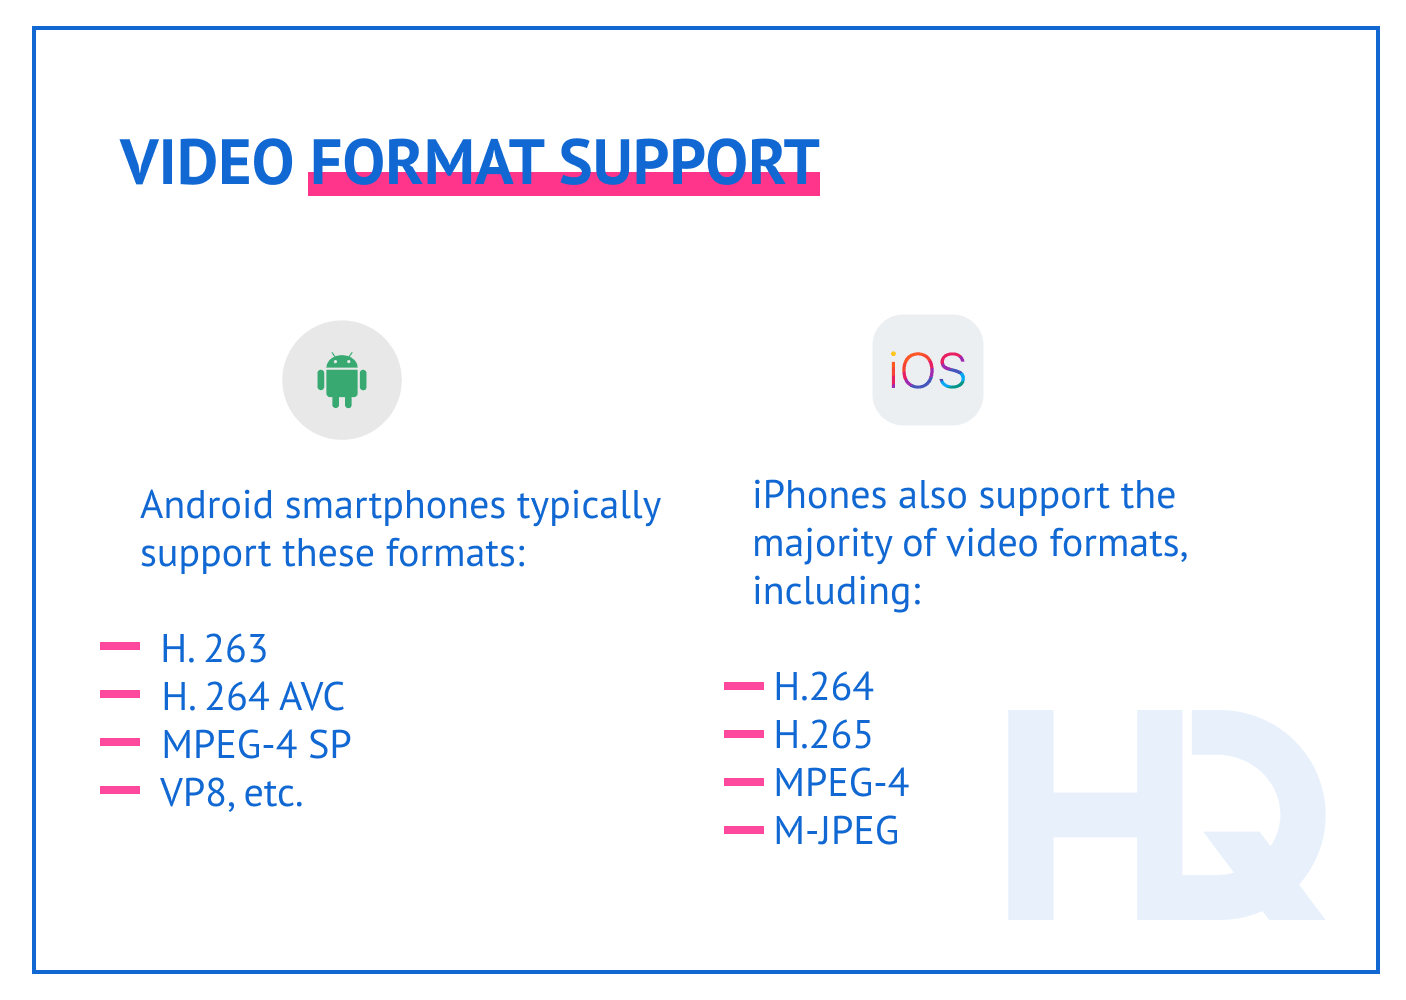 Video format support in iOS and Android apps.